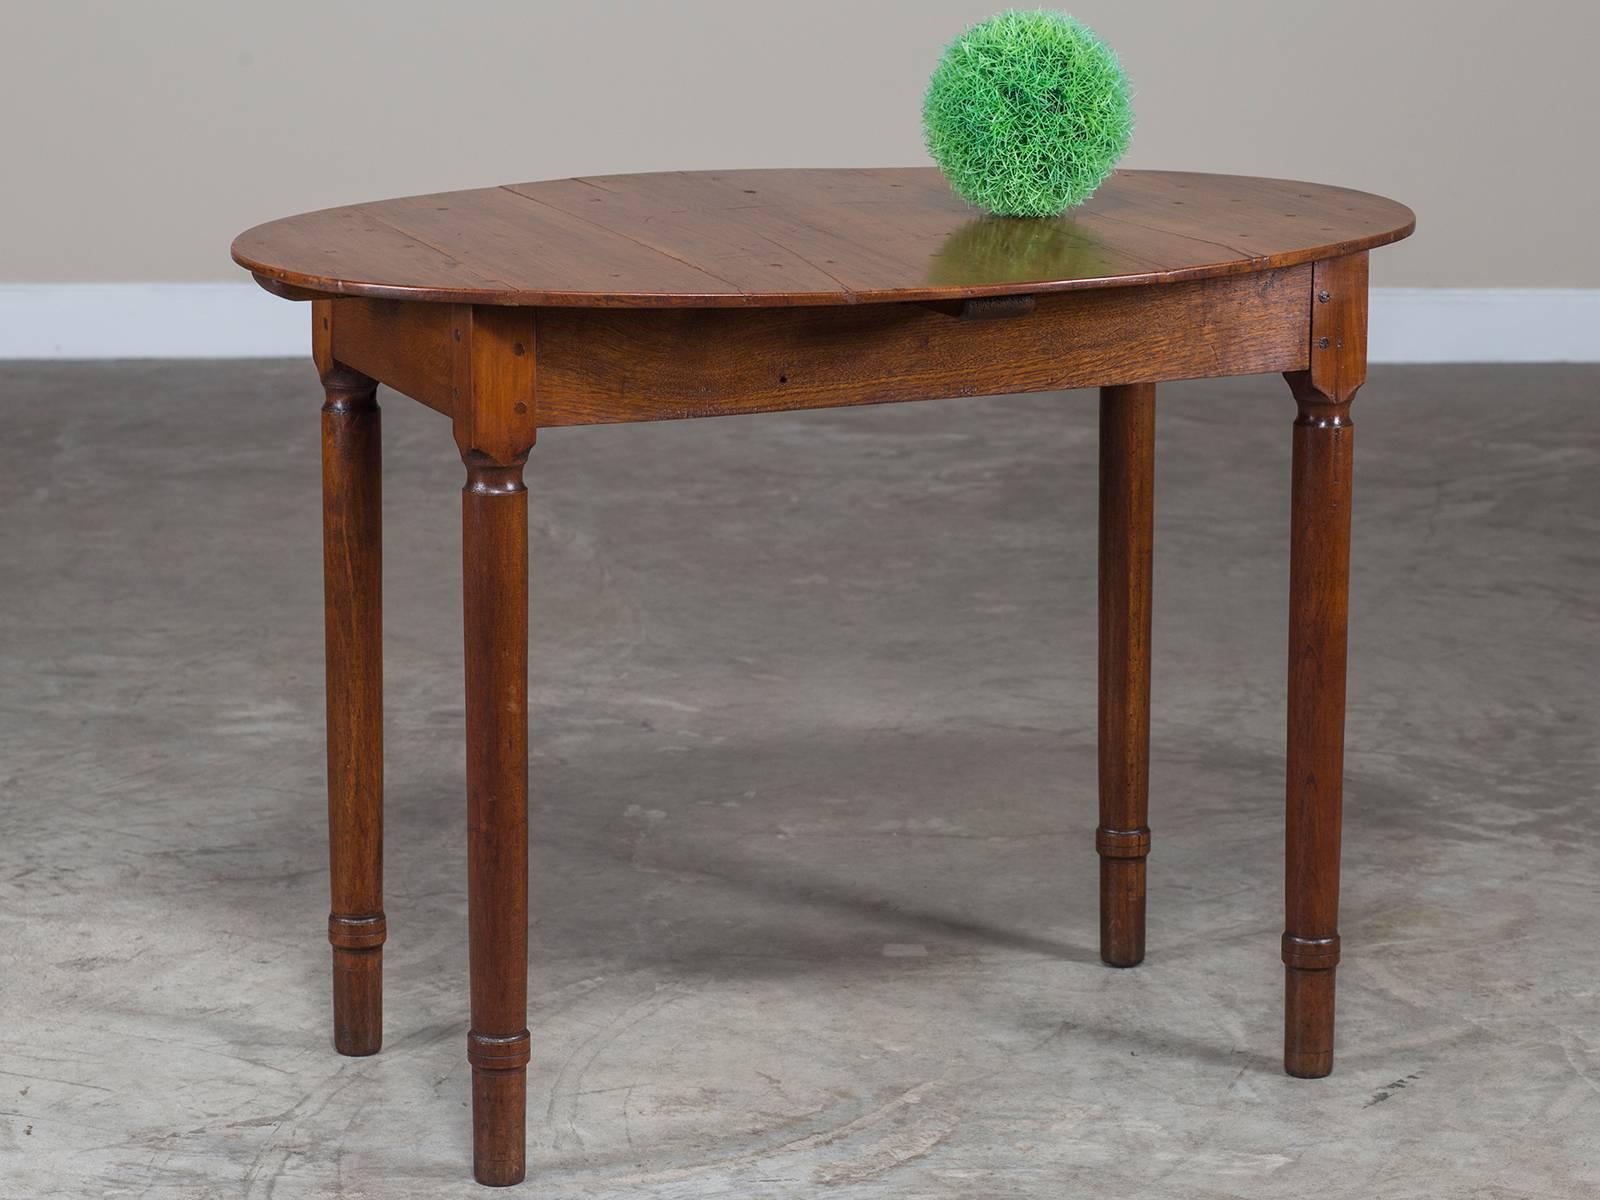 Receive our new selections direct from 1stdibs by email each week. Please click “Follow Dealer” button below and see them first!

This oval top antique French cherry and oak table circa 1830 has a stylish simplicity that is perfect for a modern